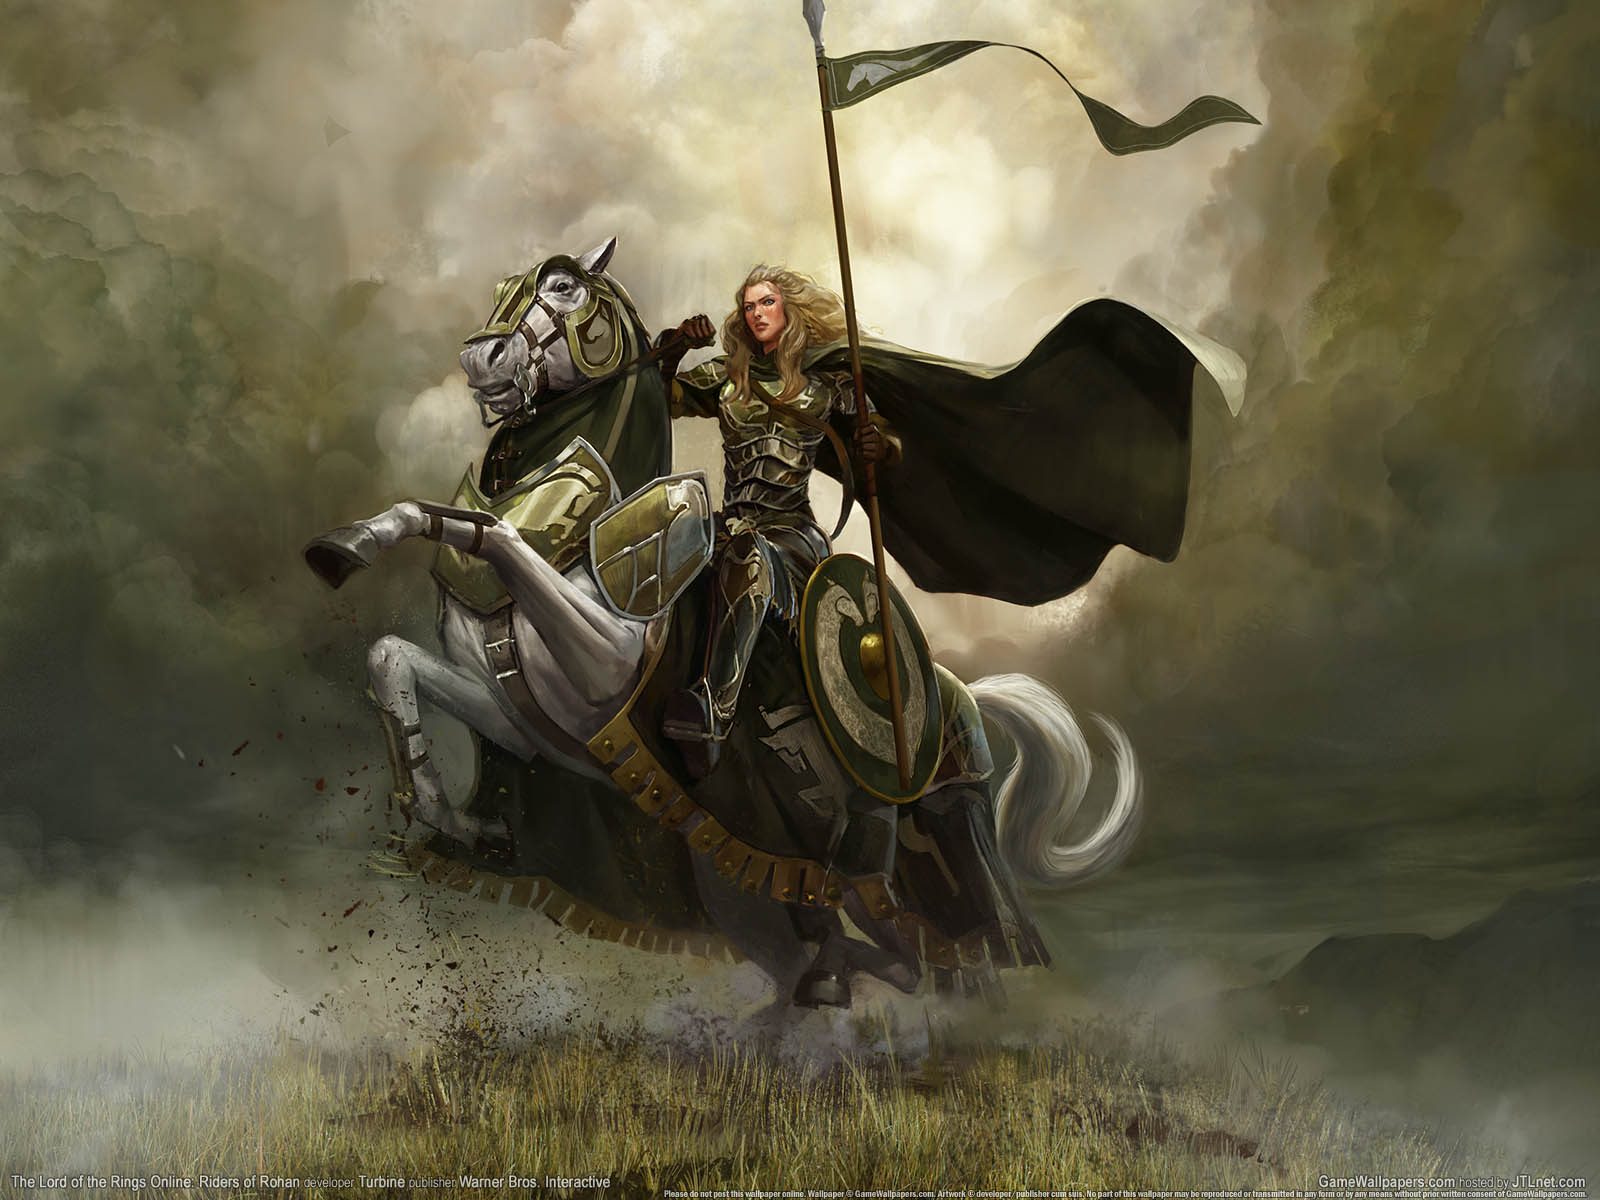 The Lord of the Rings Online%3A Riders of Rohan fond d'cran 02 1600x1200